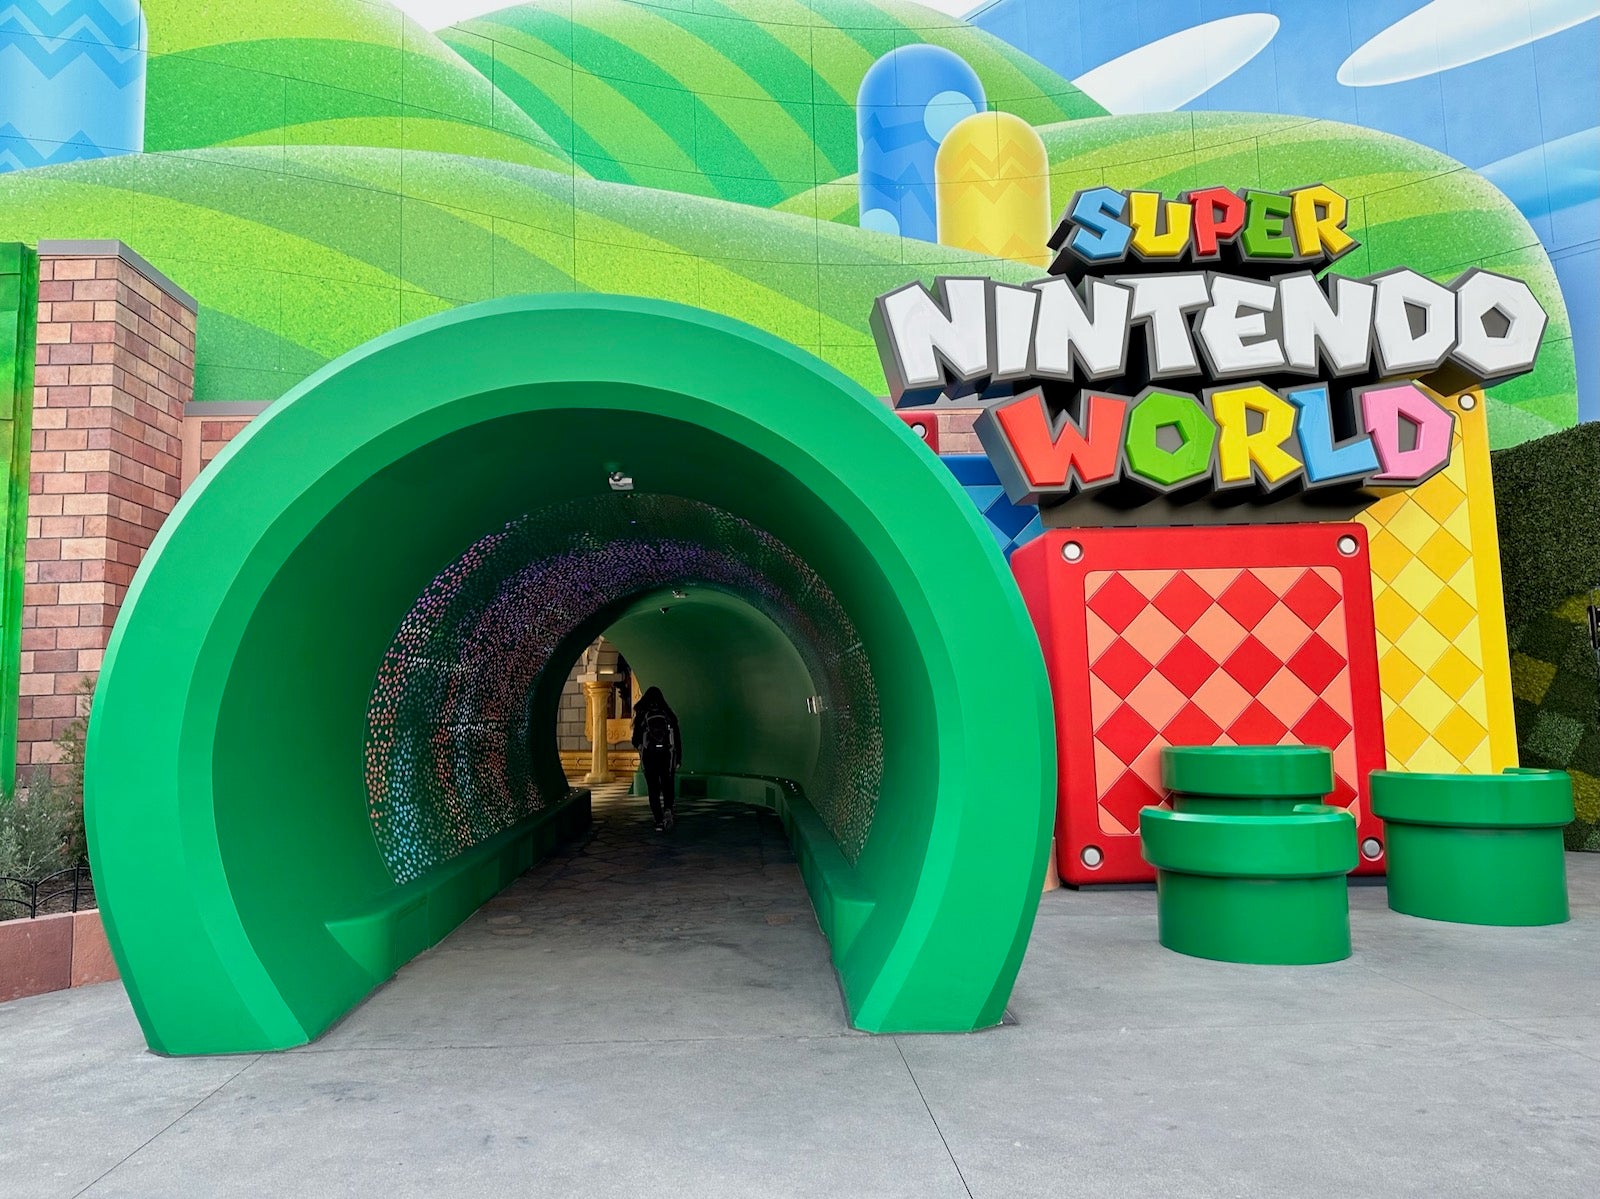 Super Nintendo World officially announced for Universal Orlando Resort -  The Points Guy